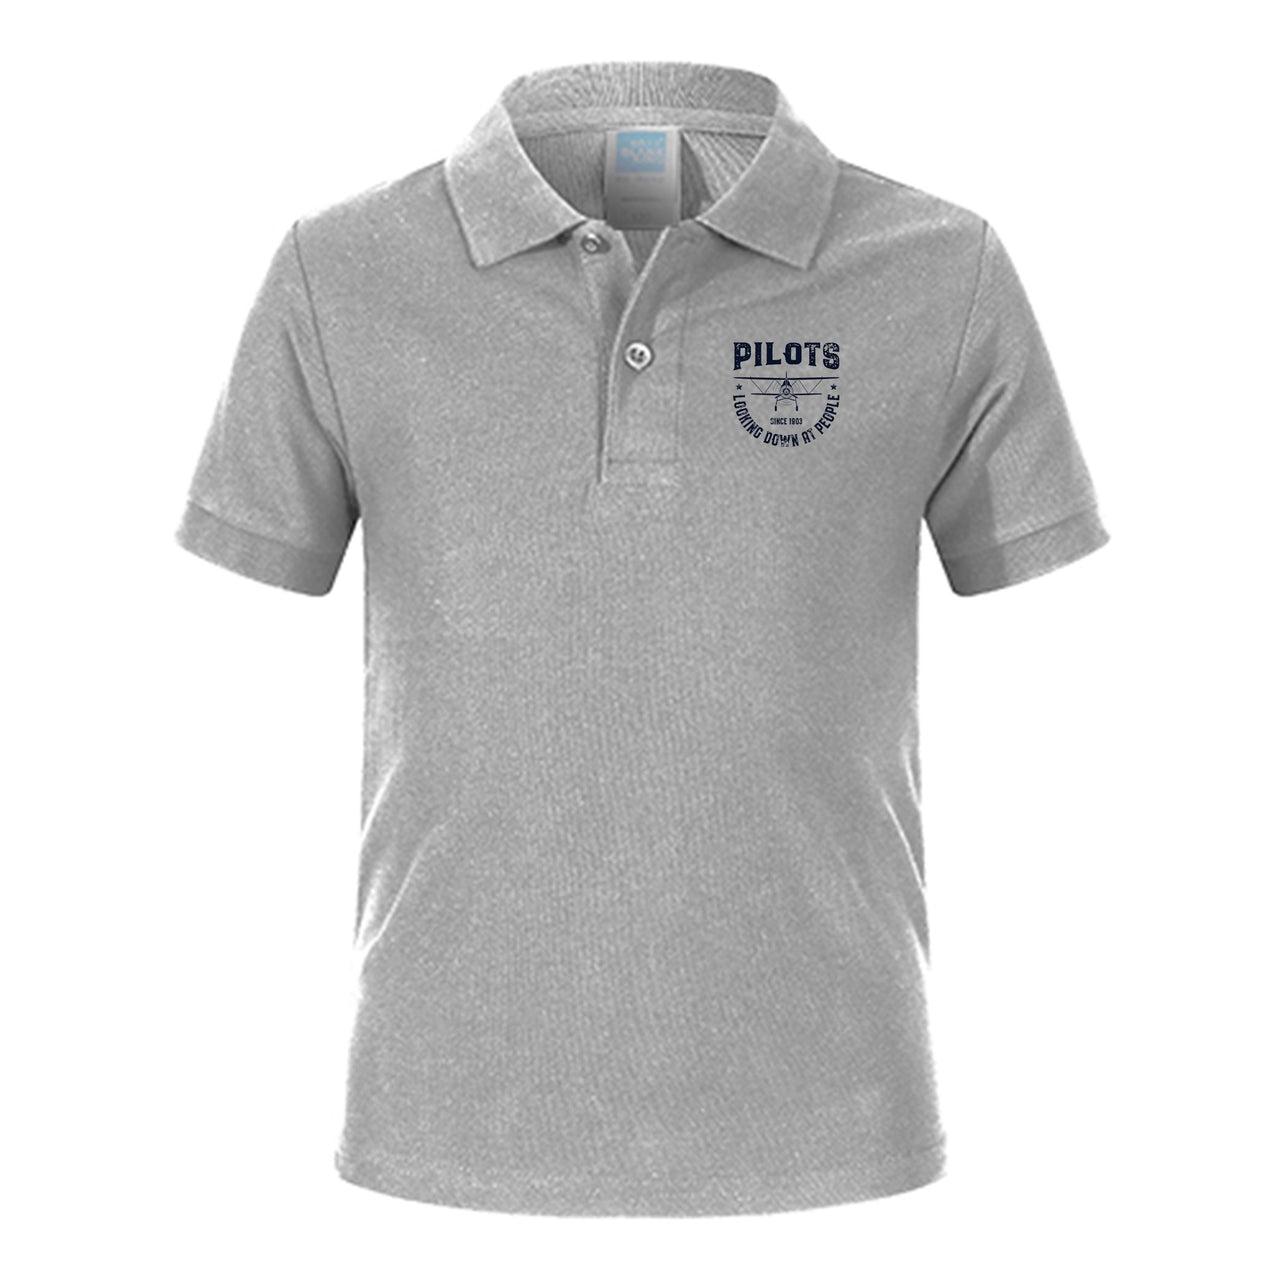 Pilots Looking Down at People Since 1903 Designed Children Polo T-Shirts